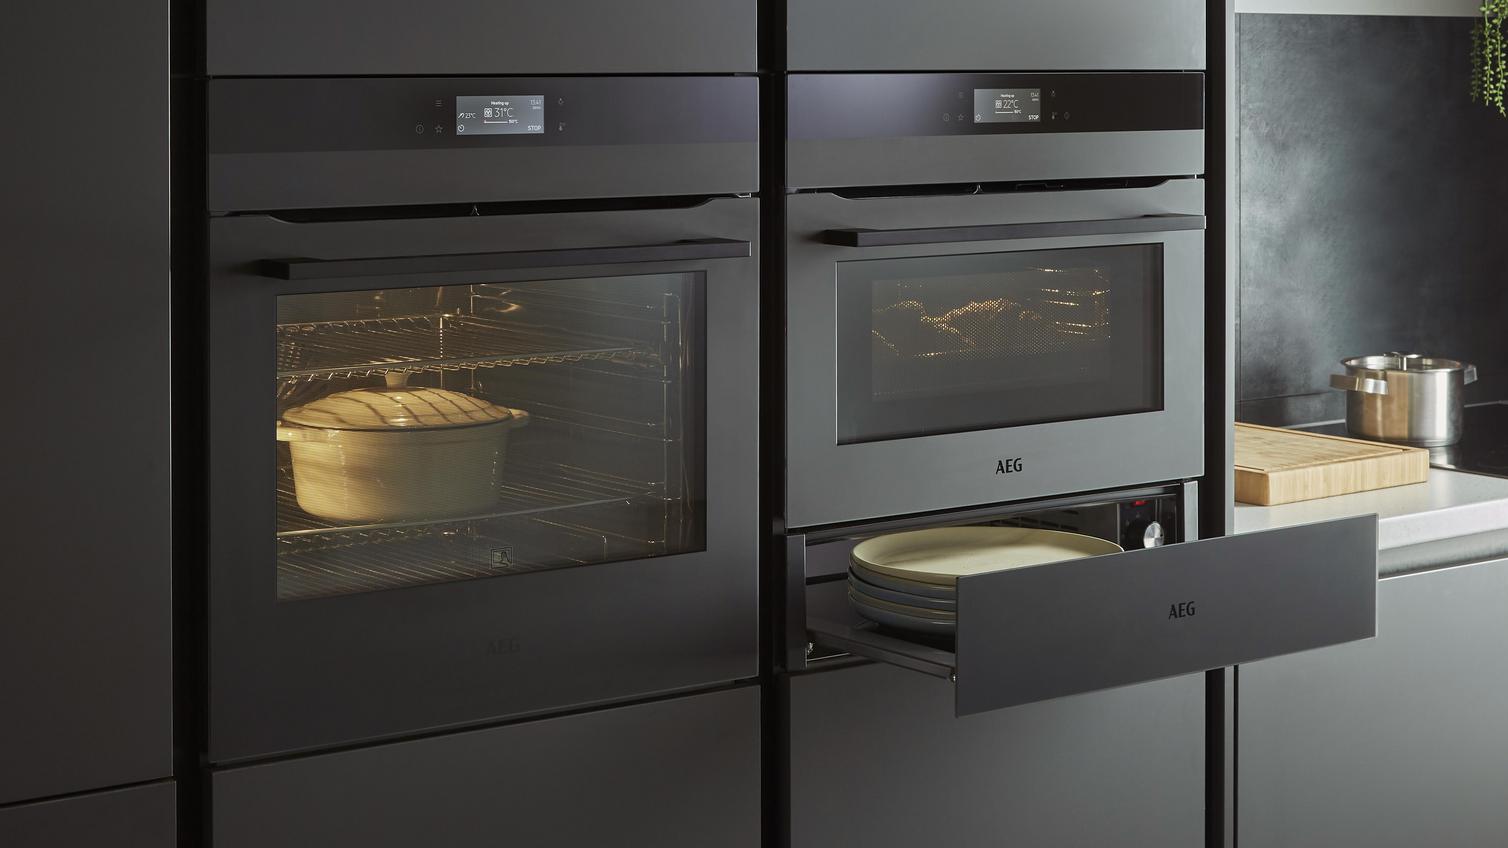 AEG Steam Crisp Single Oven, Compact Oven With Microwave and Two Warming Drawers, One Open